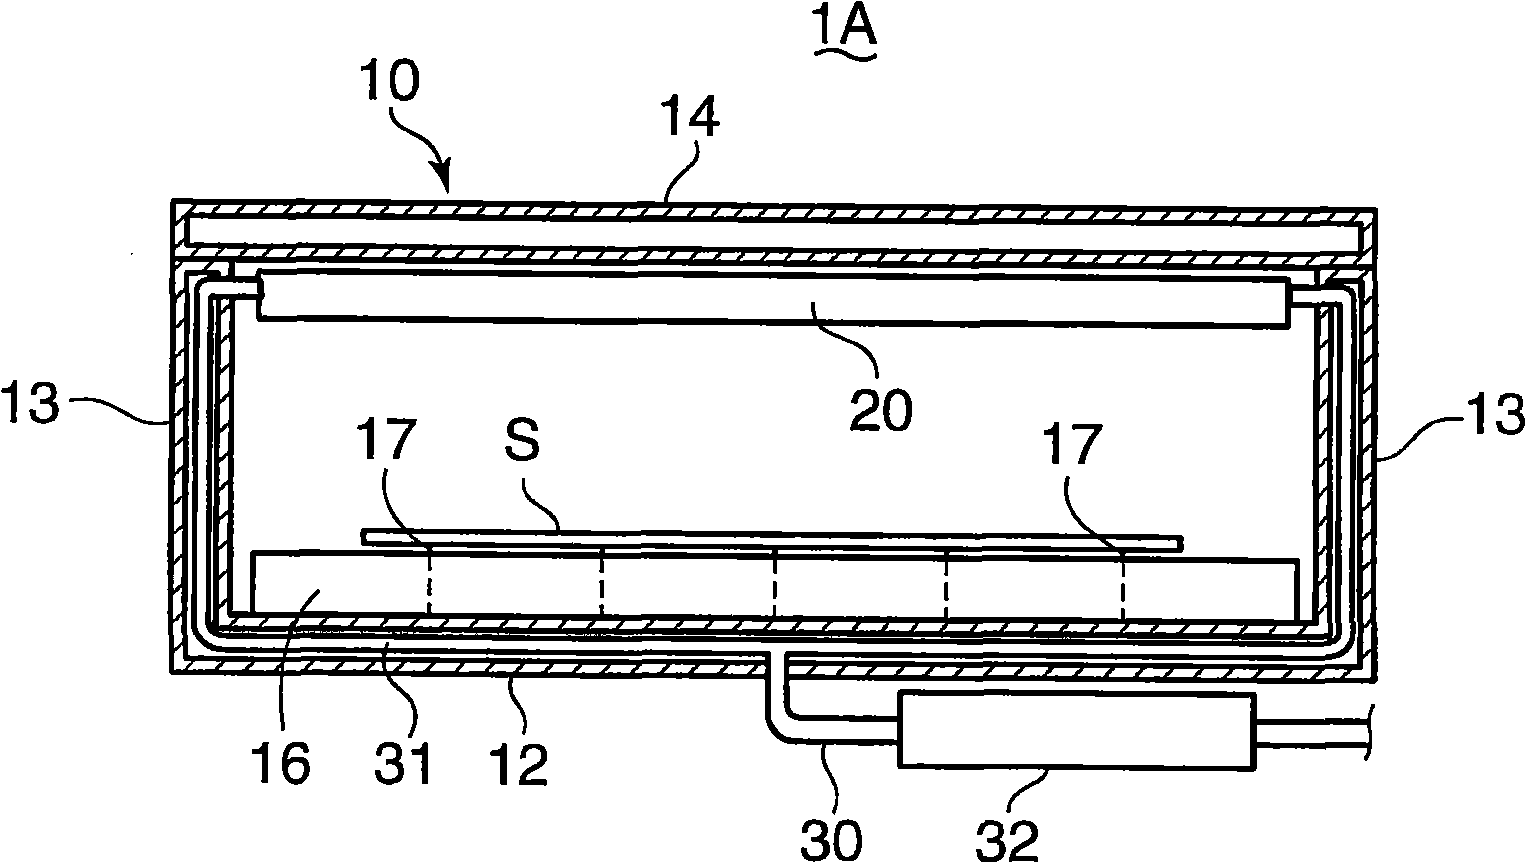 Substrate hot processing apparatus and nozzle member